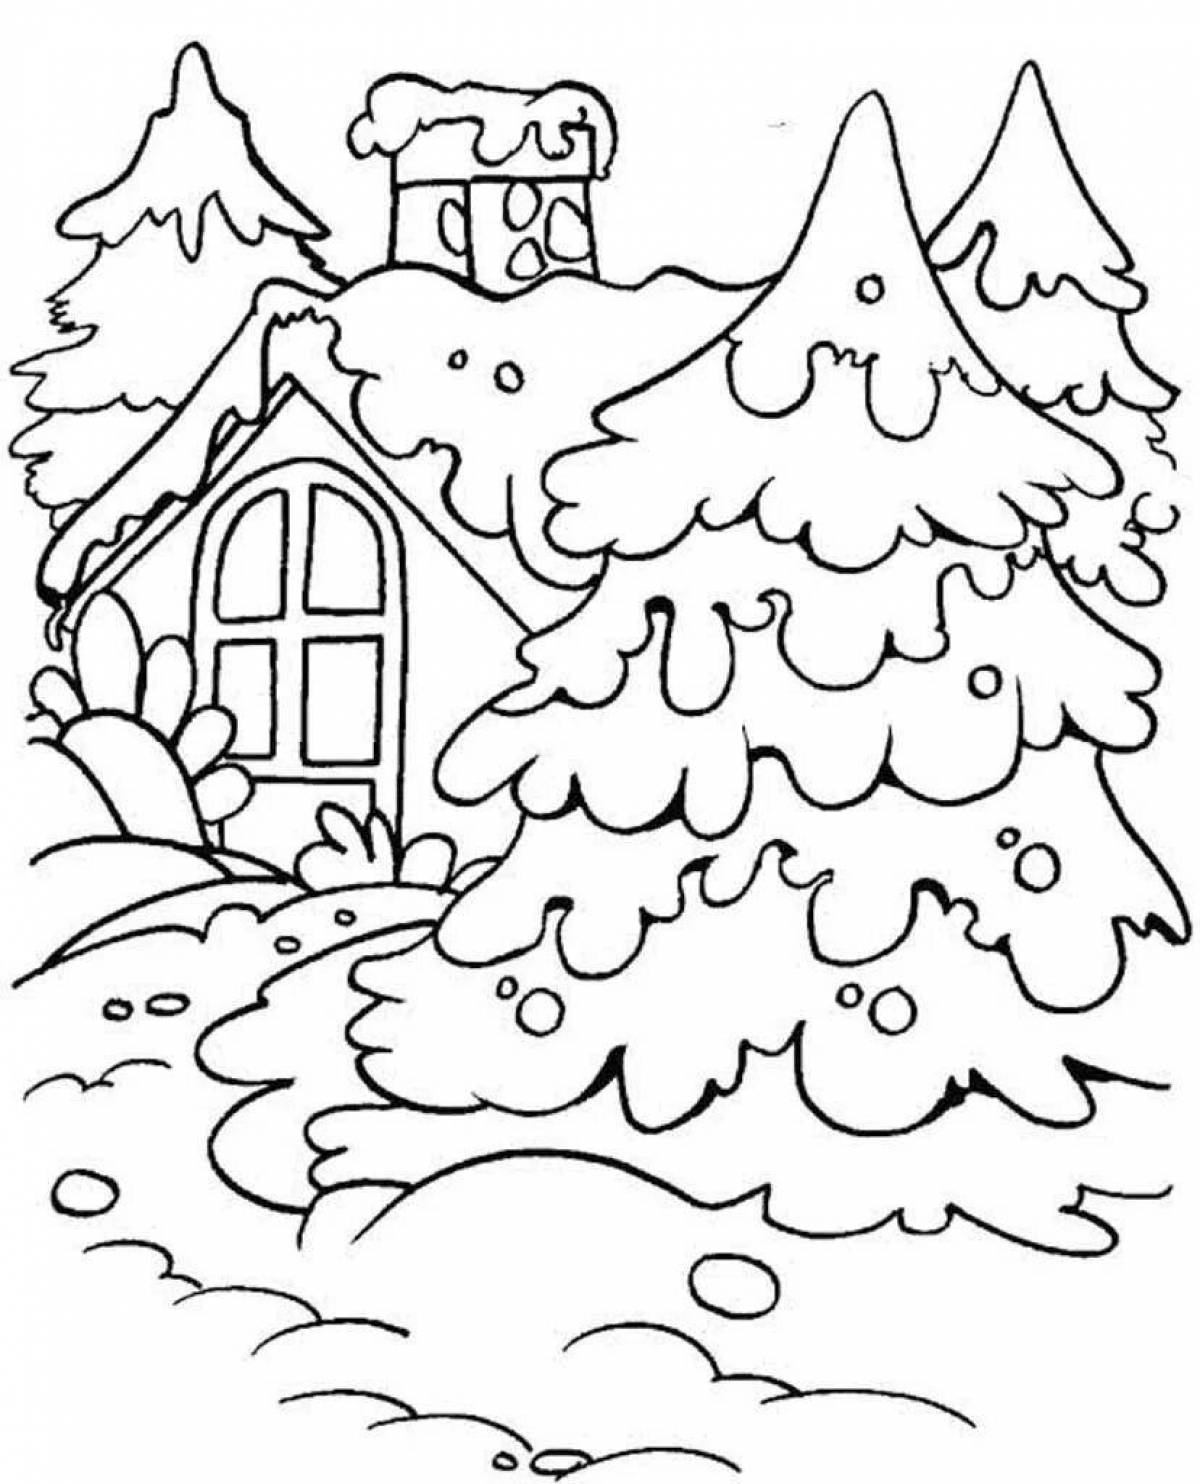 Creative drawing of a winter landscape for children